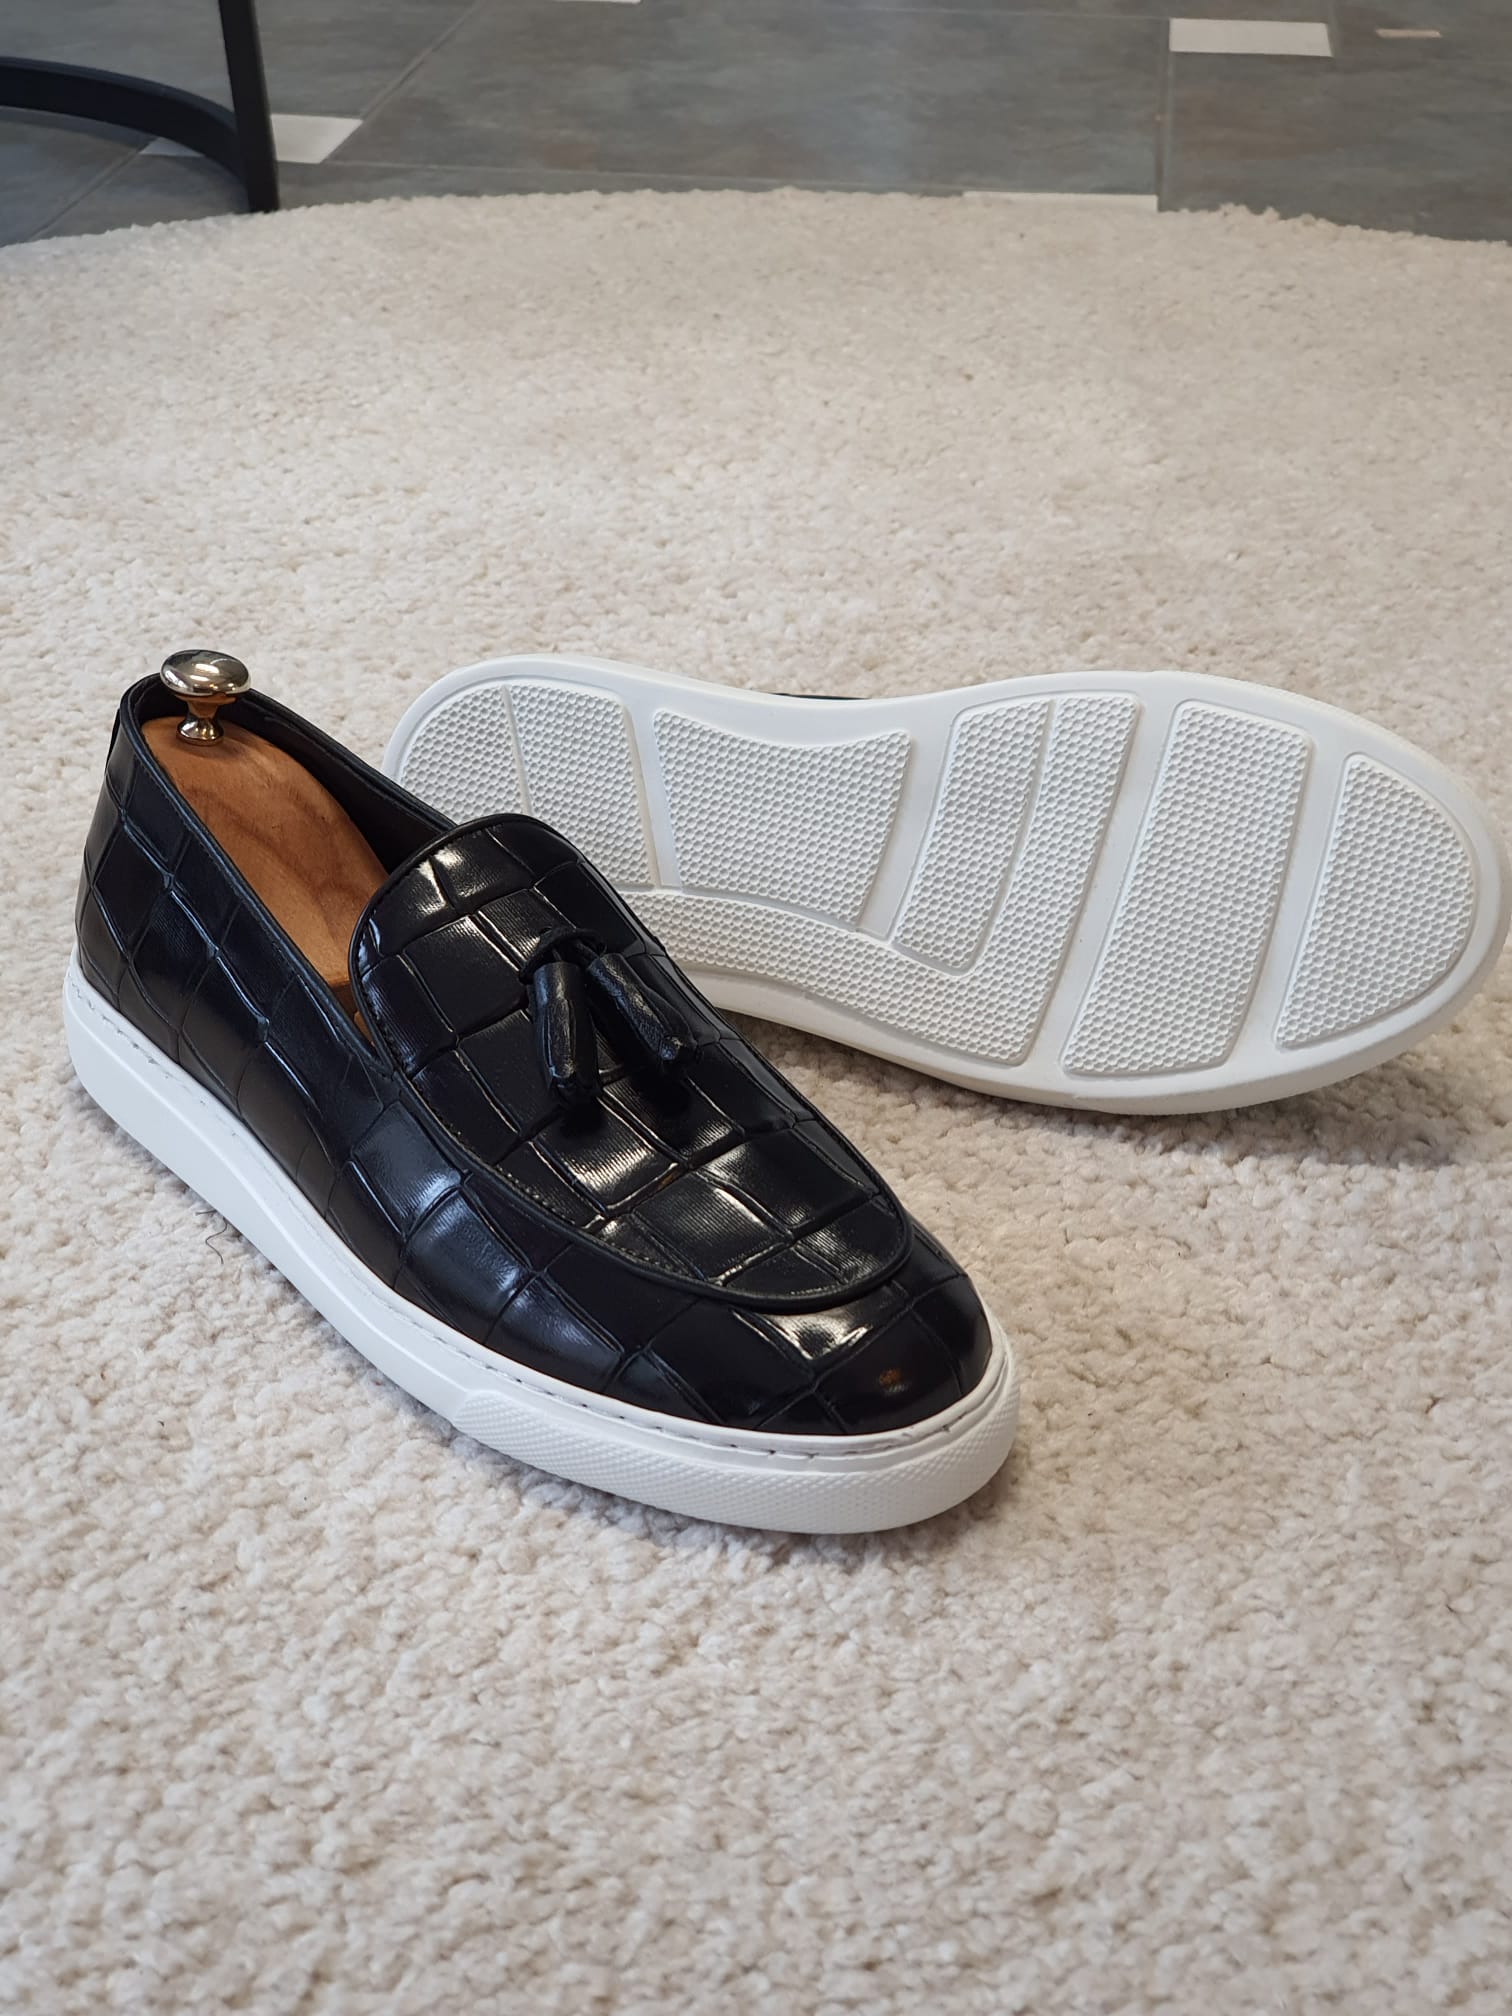 Louis Vuitton Embossed Leather Shoes